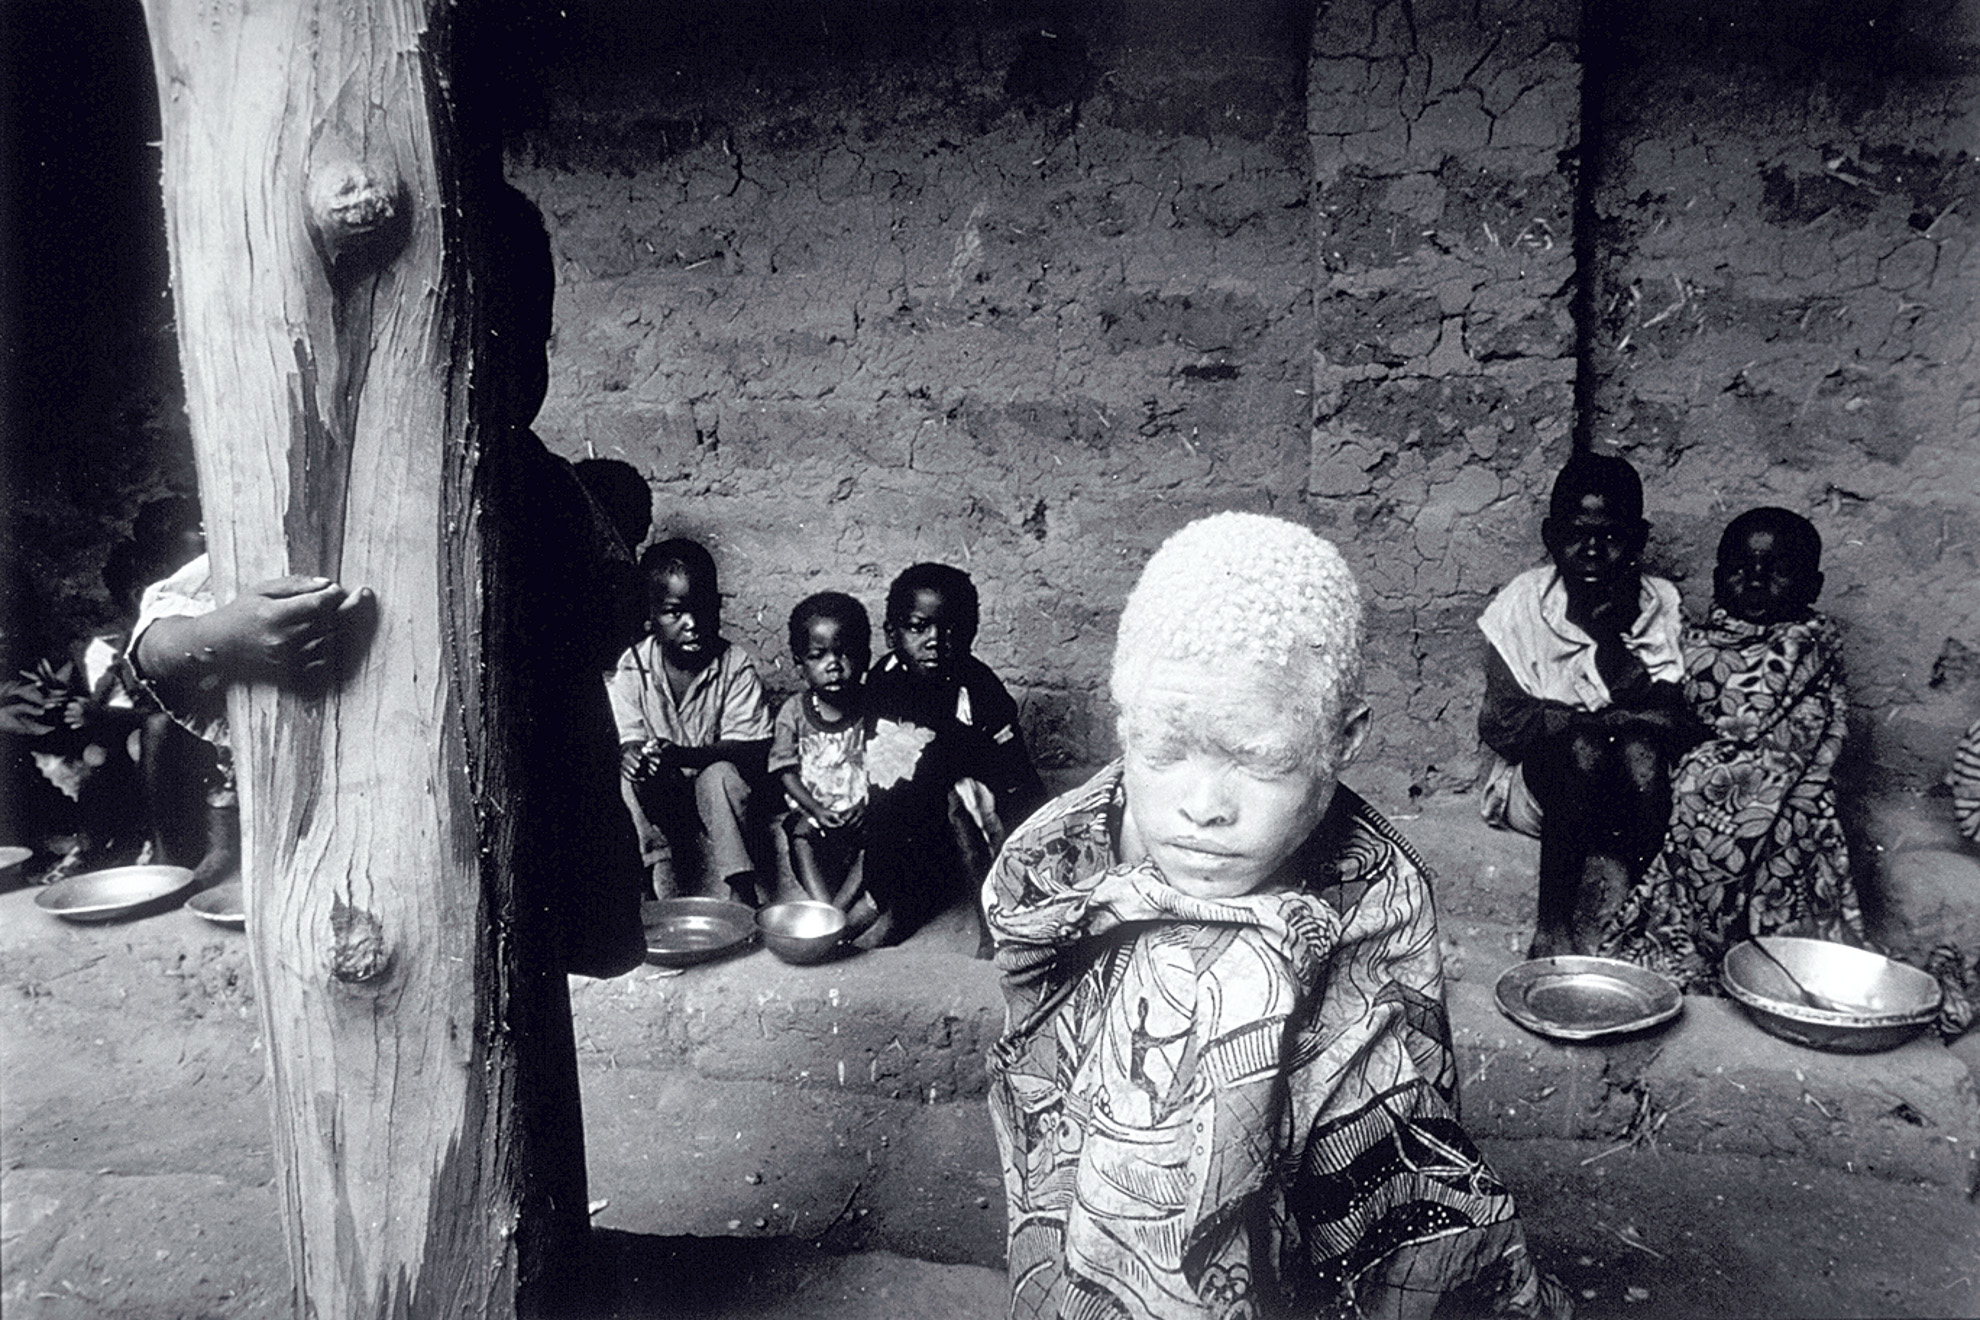 Children receive food from the World Food Programme (WFP) at the Malange reception center. The albino girl has been set apart as an outsider among her people.